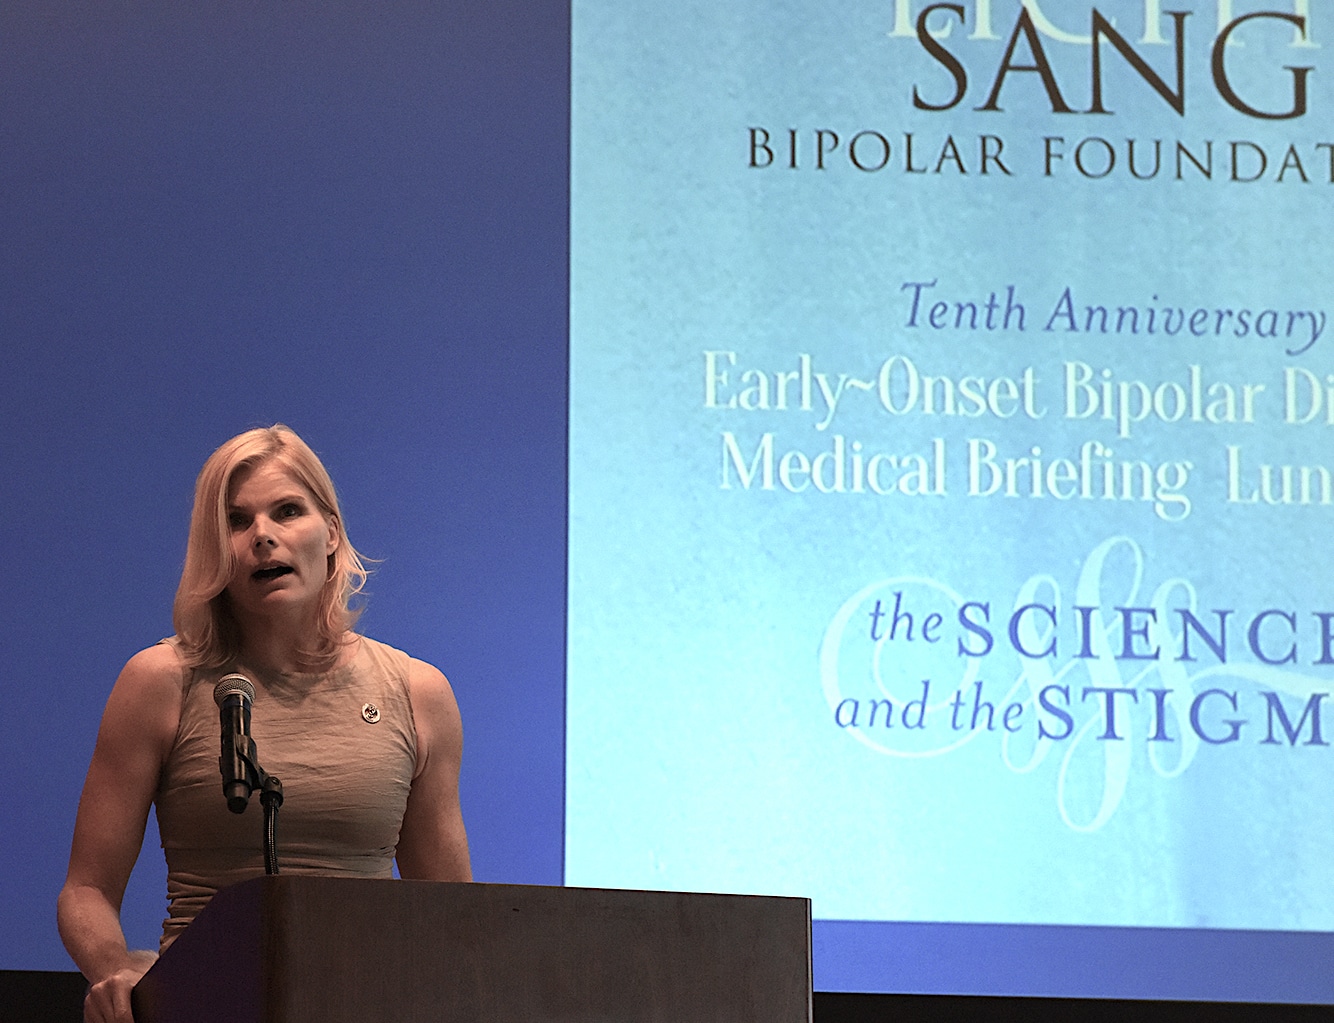 Mariel Hemingway at the Foundation's Chicago Early-Onset Bipolar Disorder Medical Briefing Luncheon